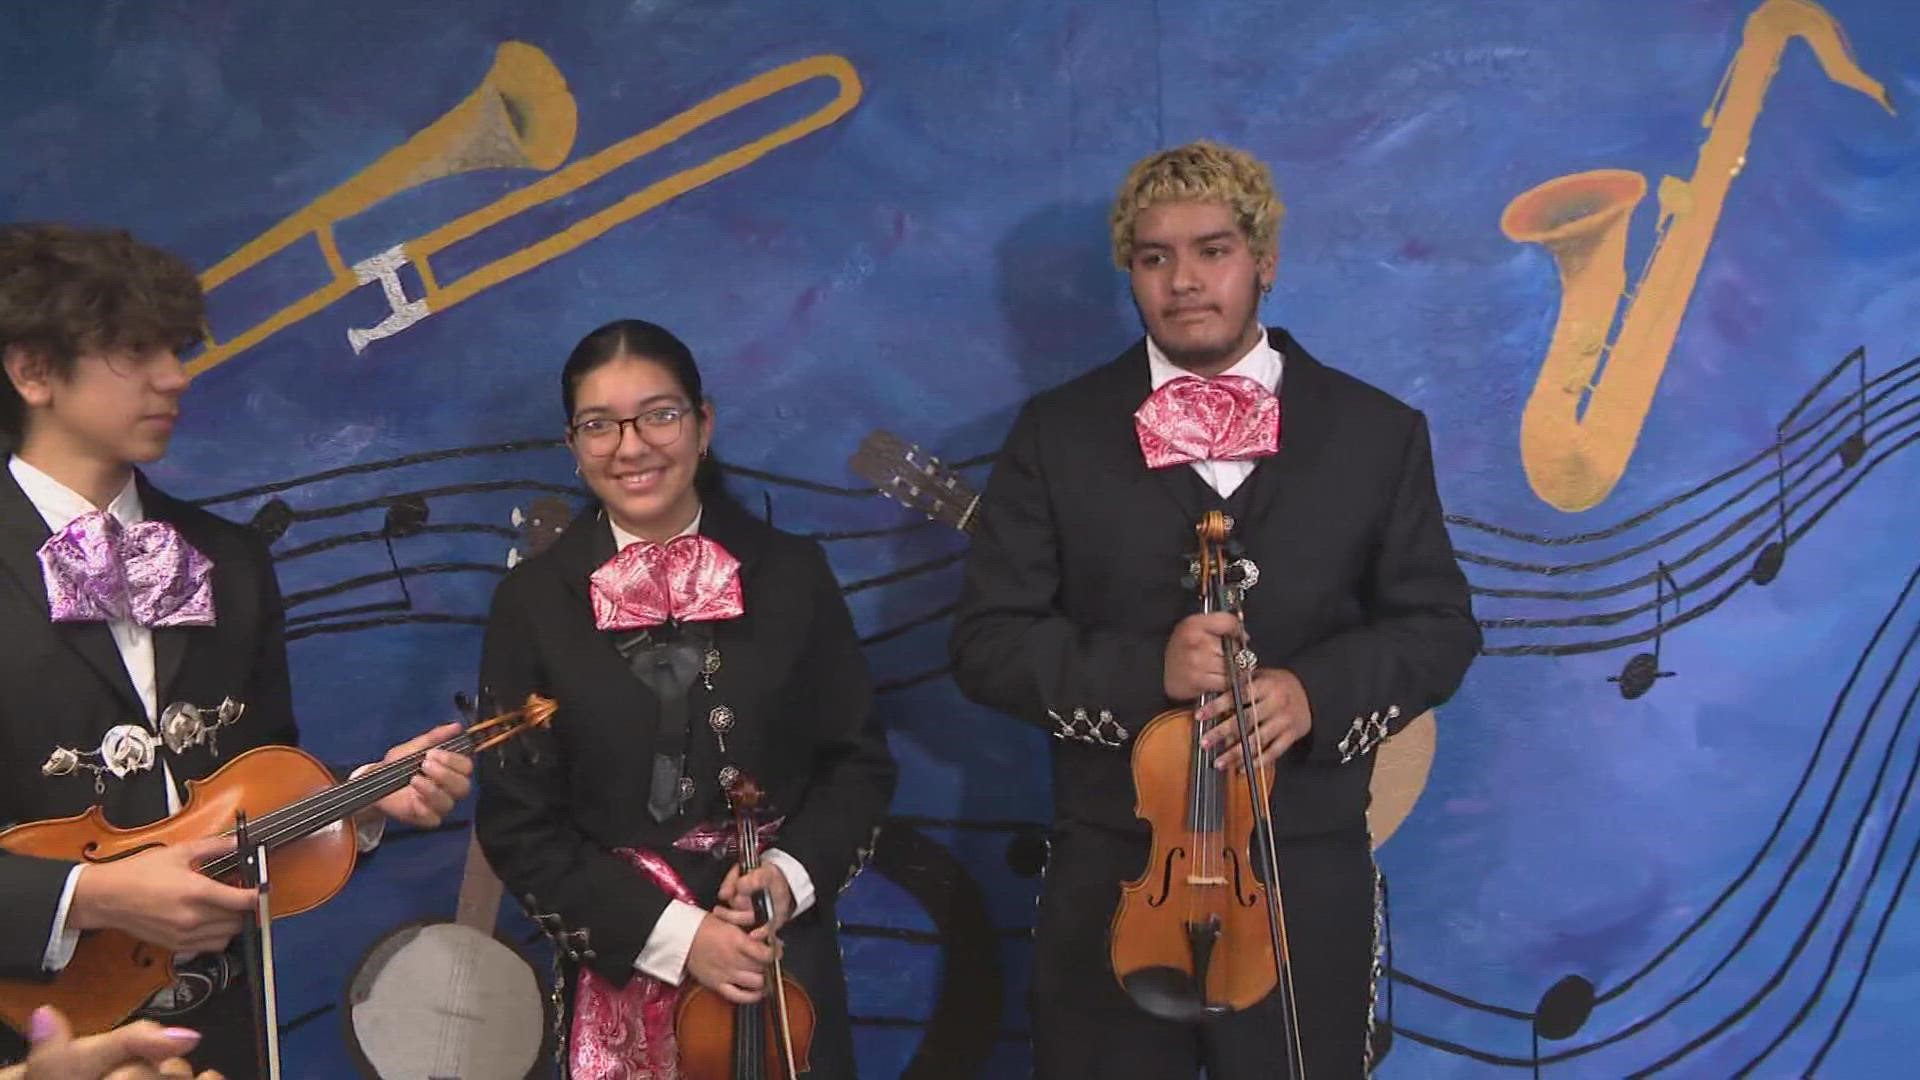 Desert Sounds is a youth mariachi group in the Valley that allows its musicians to connect with their cultural heritage.